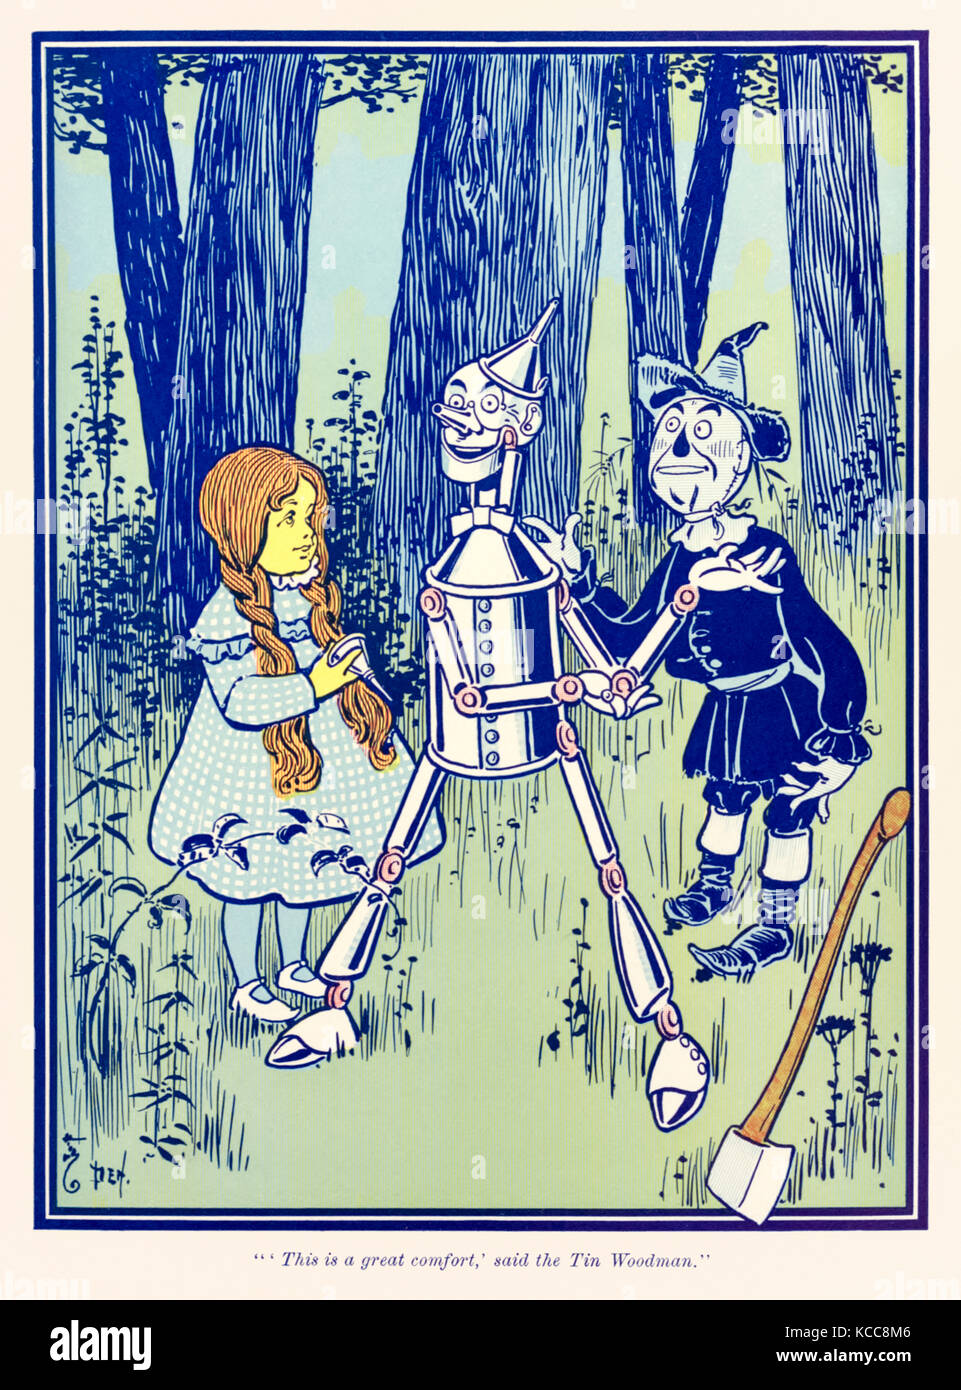 “’This is a great comfort,’ said the Tin Woodman.” from ‘The Wonderful Wizard of Oz’ by L. Frank Baum (1856-1919) with pictures by W. W. Denslow (1856-1915). See more information below. Stock Photo